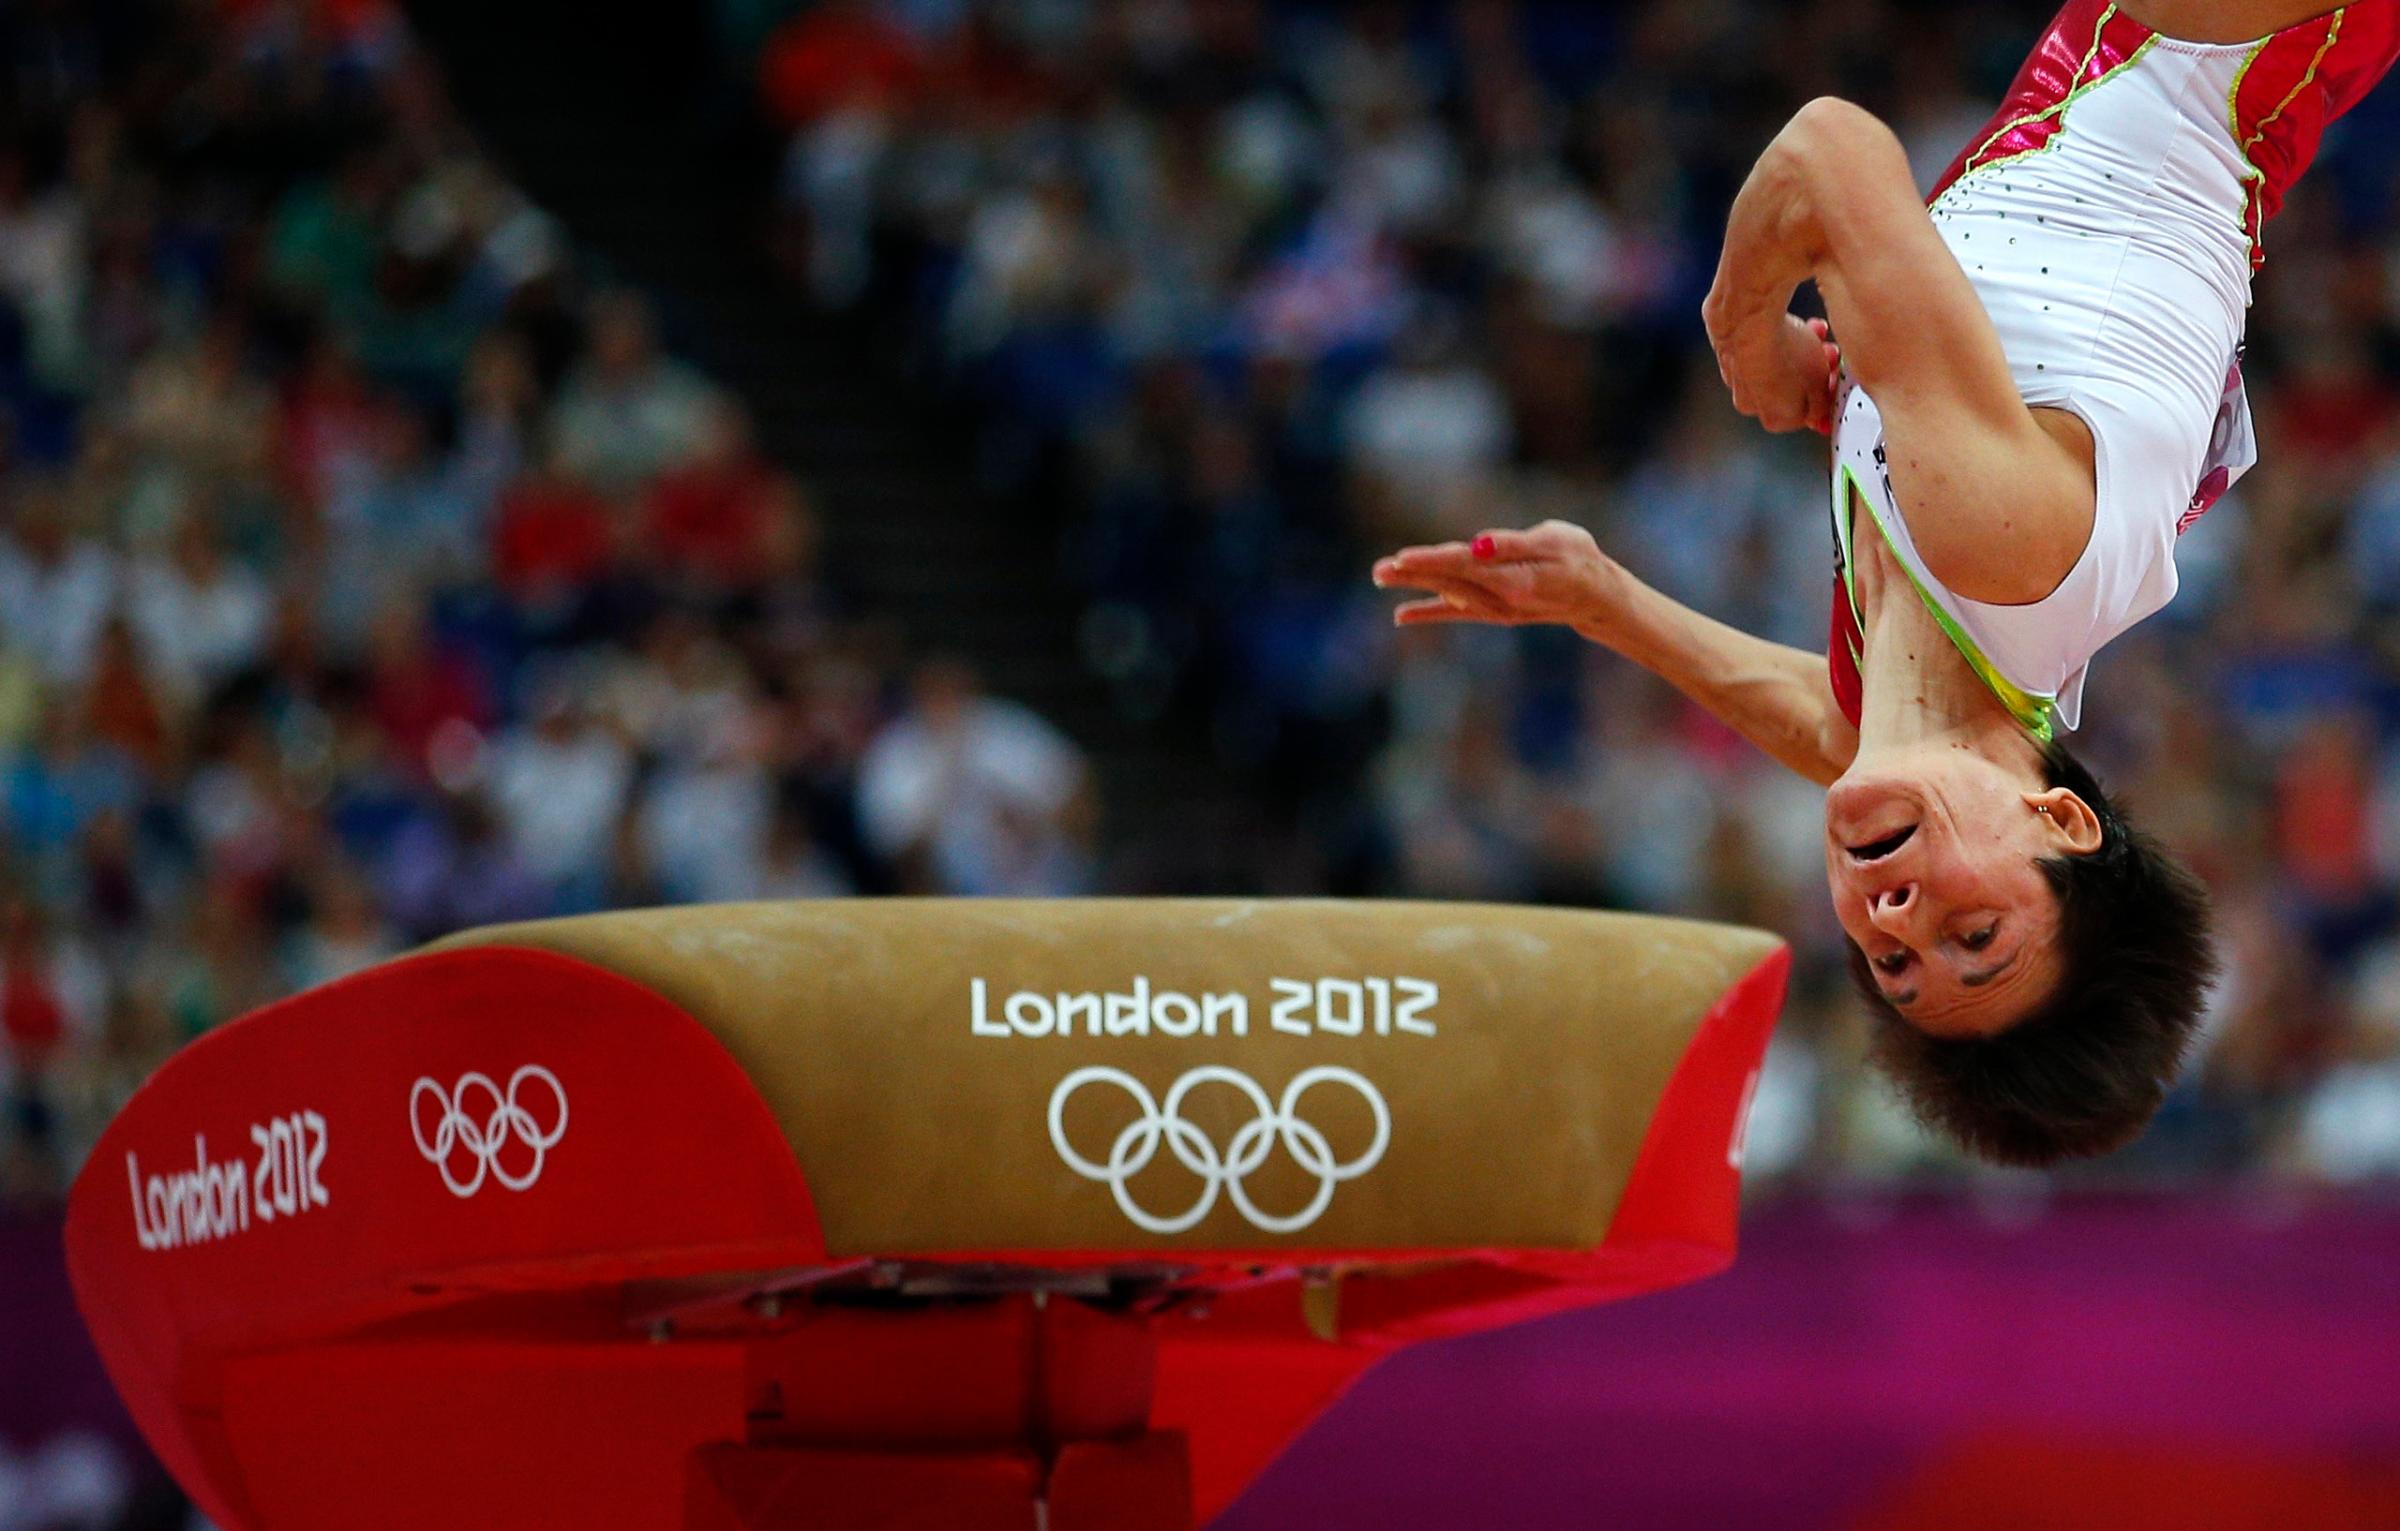 Oksana Chusovitina—At 41, she’s the oldest female Olympic gymnast ever, and she has a team gold and an individual silver medal to show for her six appearances at the Games. Her best chance for more hardware will be in the vault.